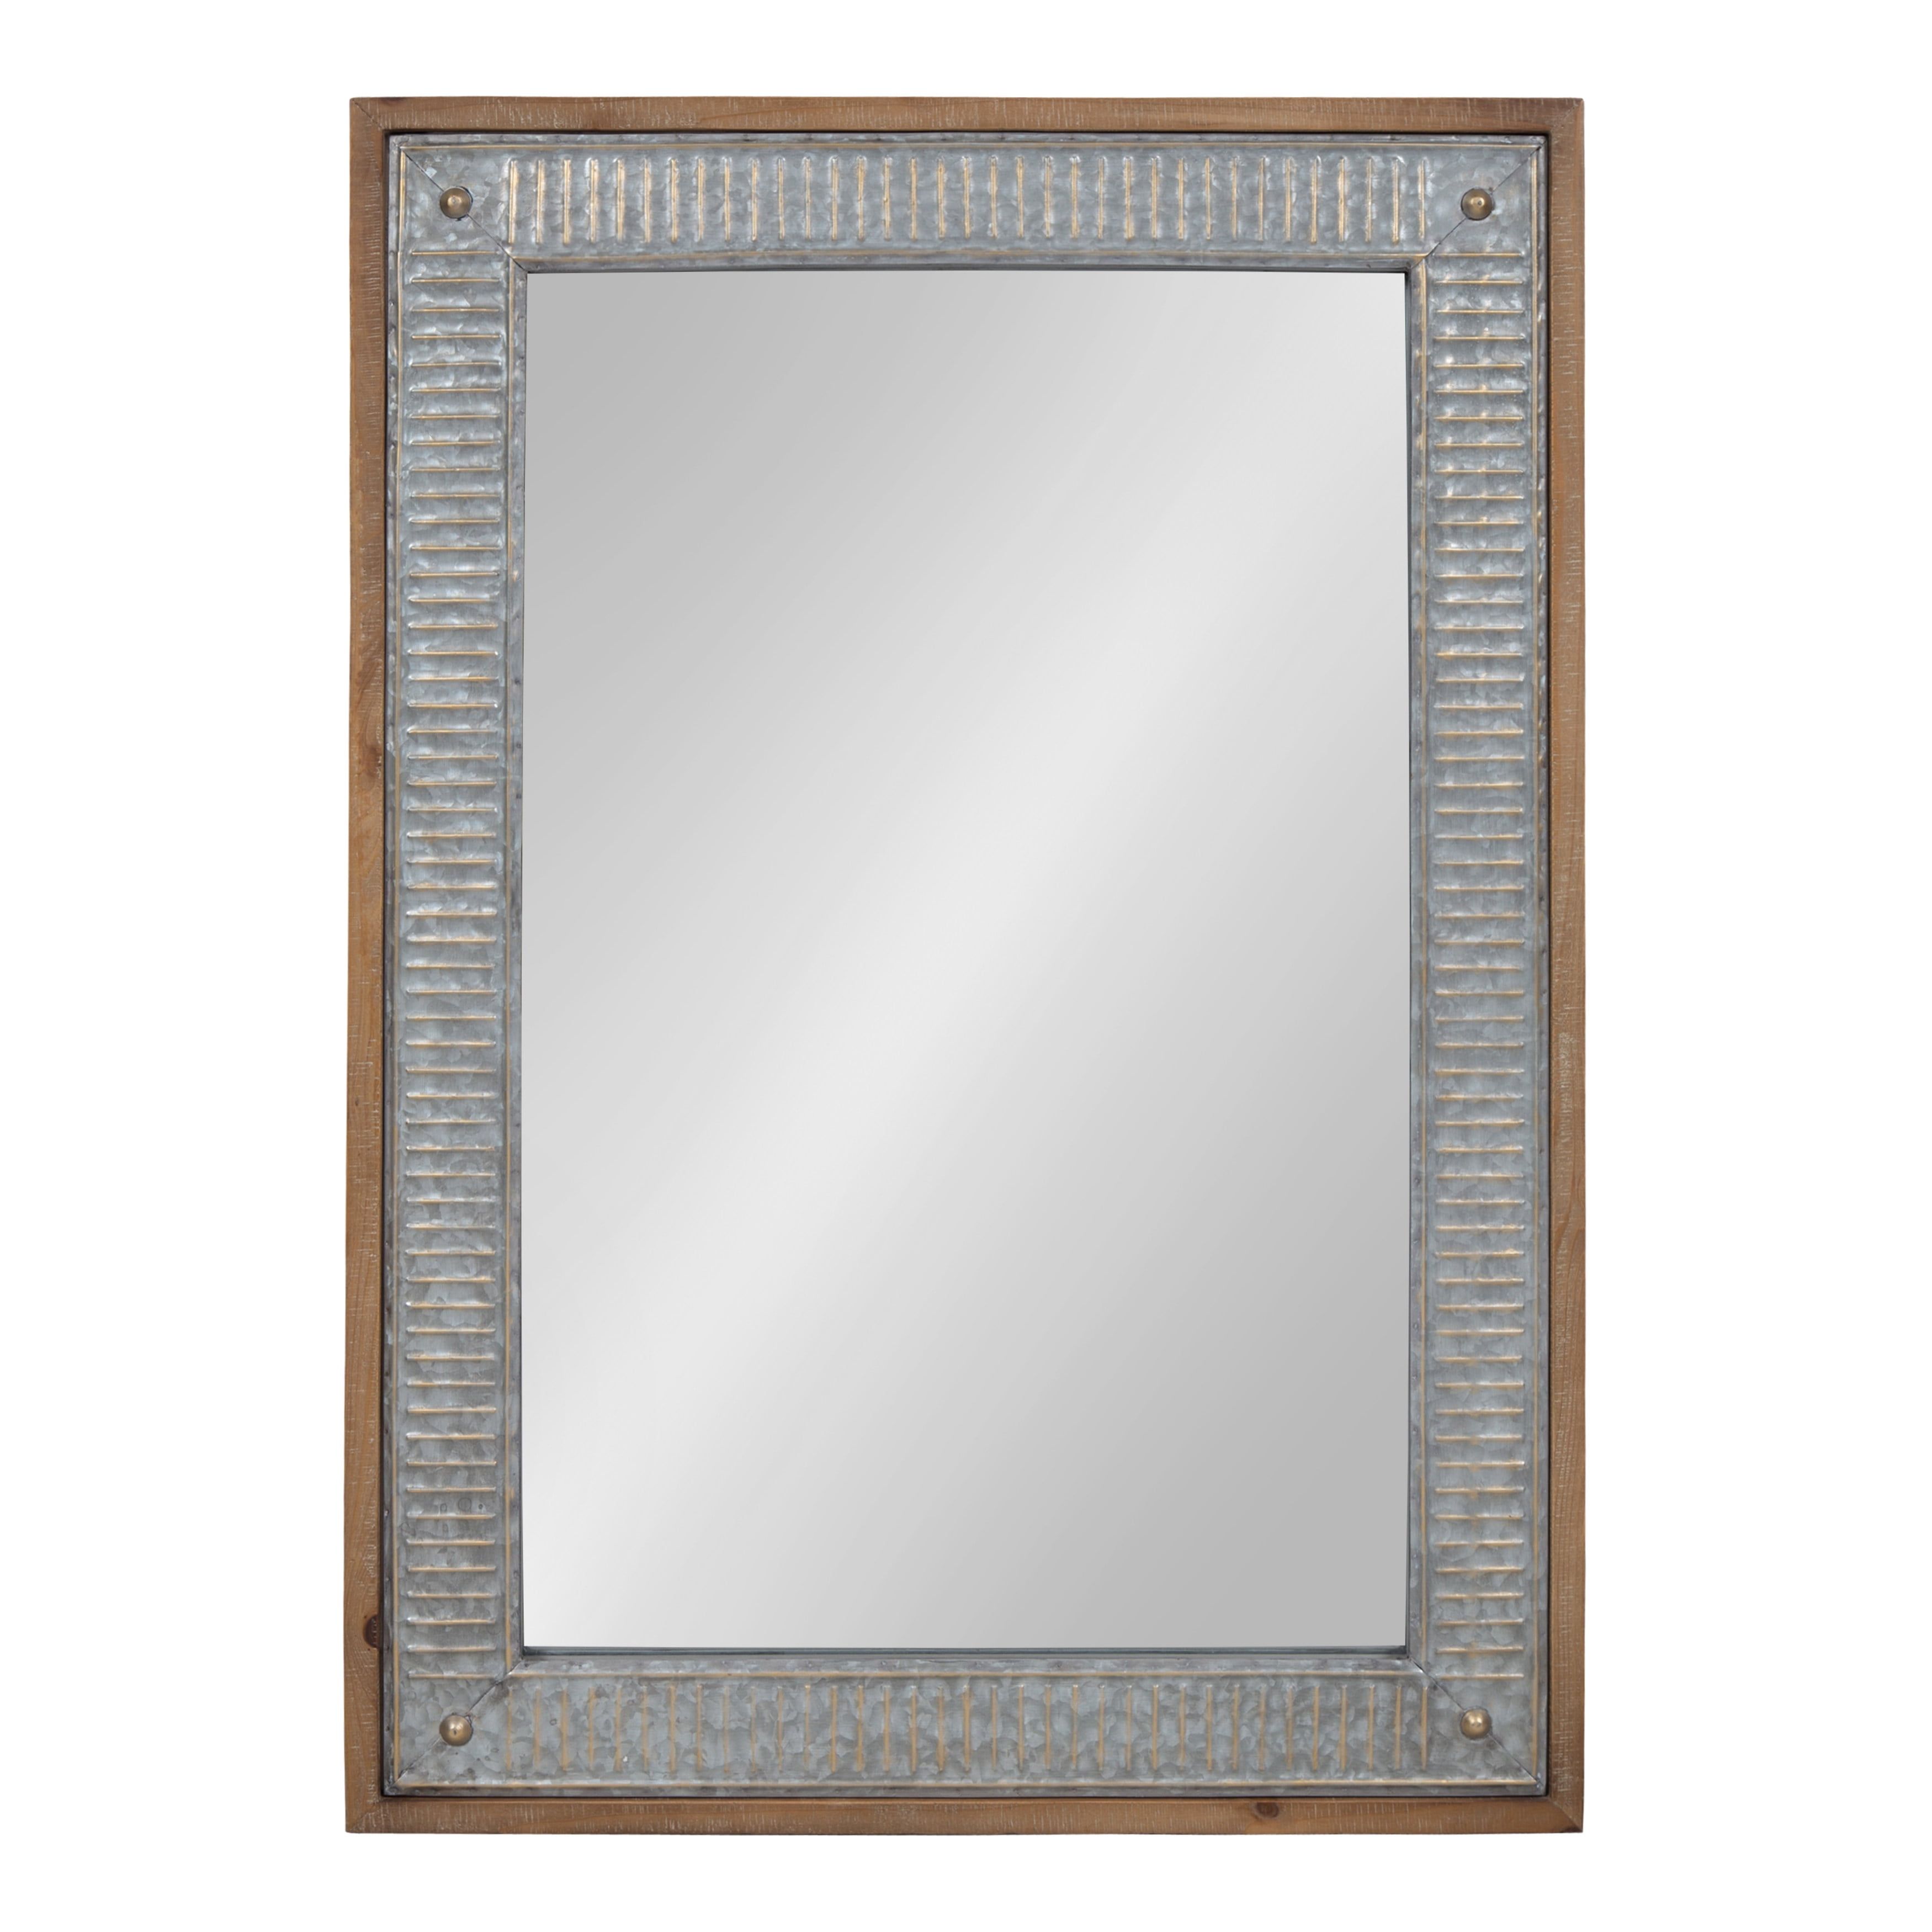 Rustic Brown Wood and Galvanized Metal Full-Length Wall Mirror